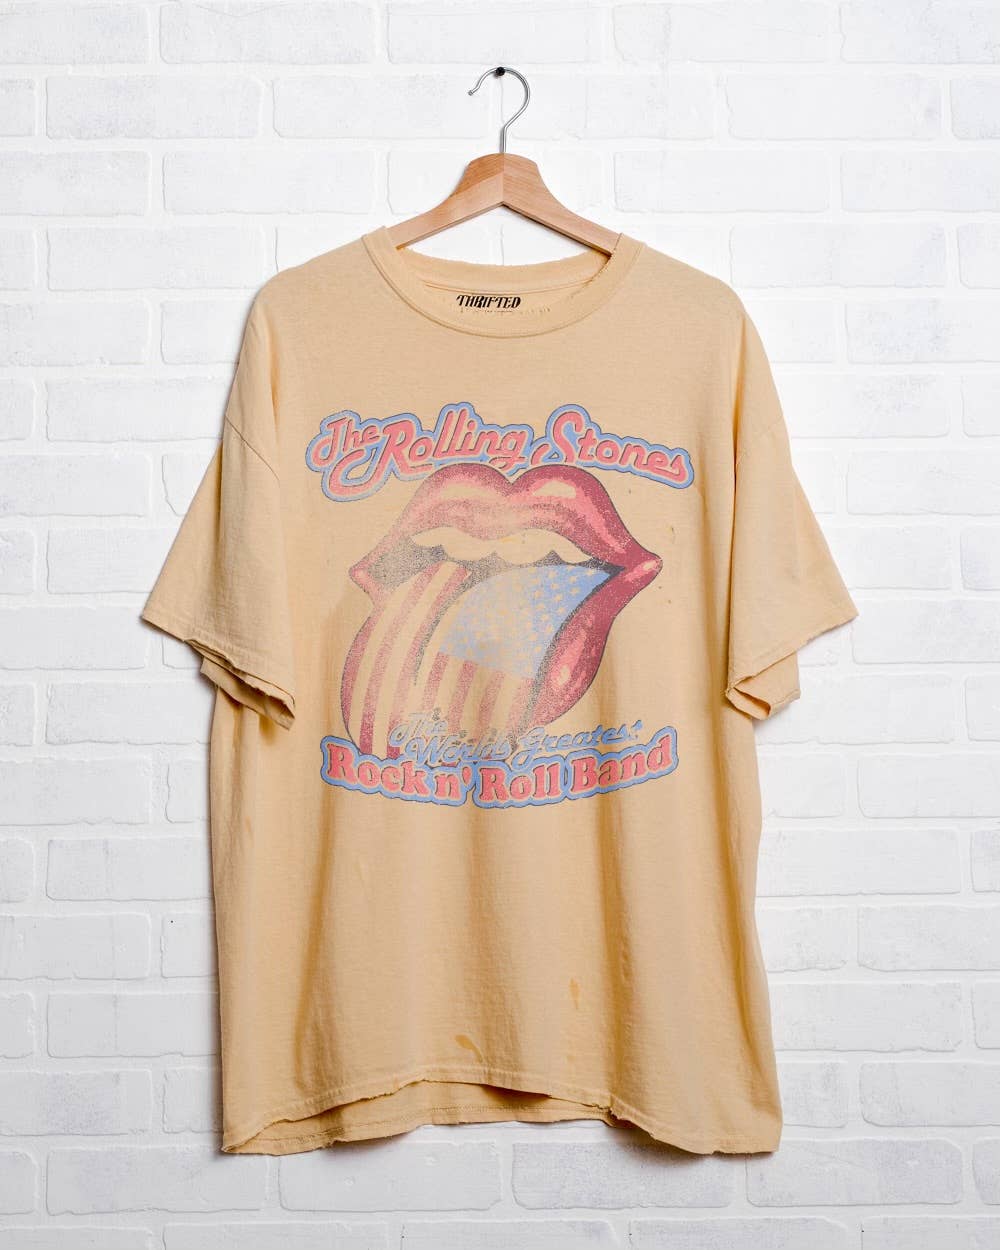 Rollings Stones Thrifted Tee